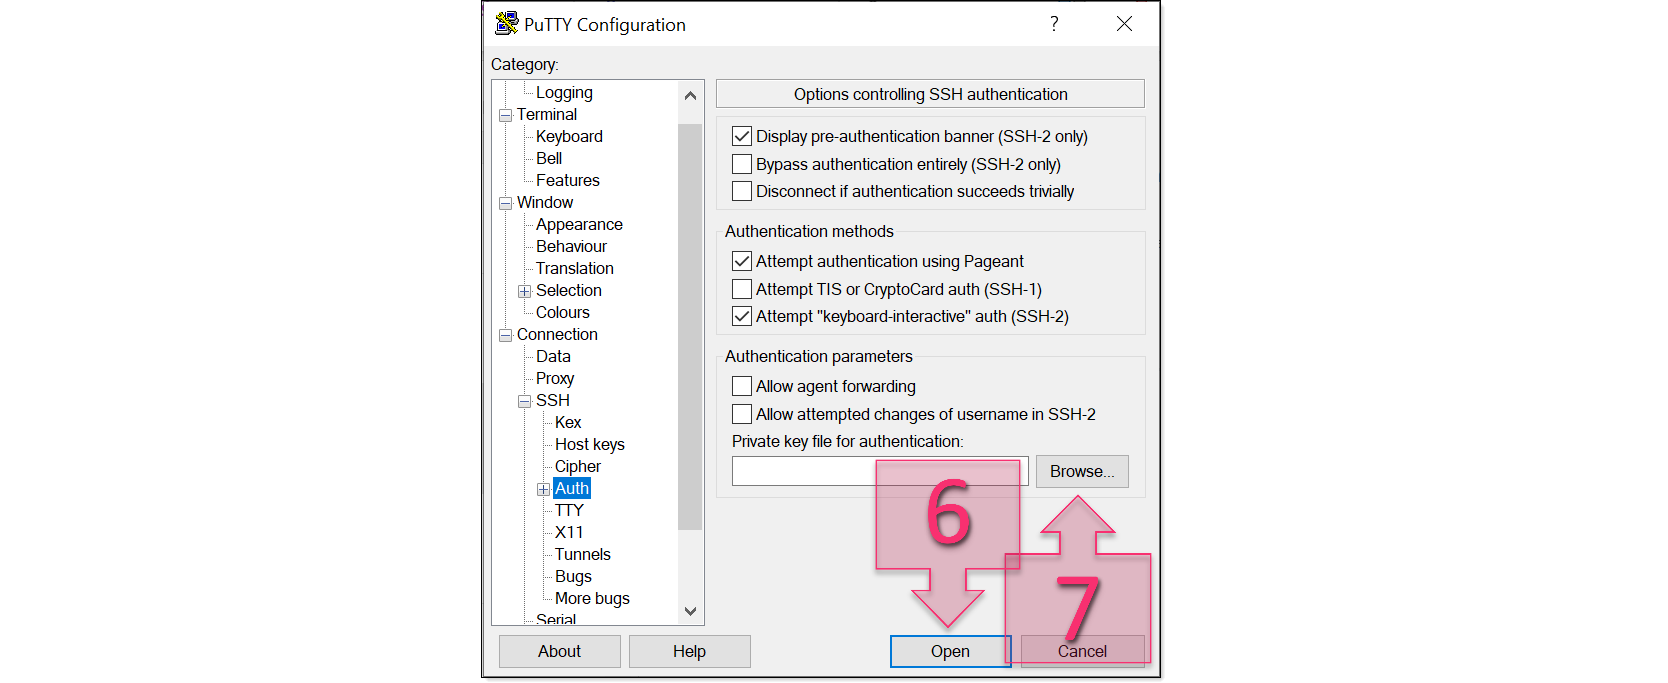 Step 2. Configuring authentication settings in PuTTY